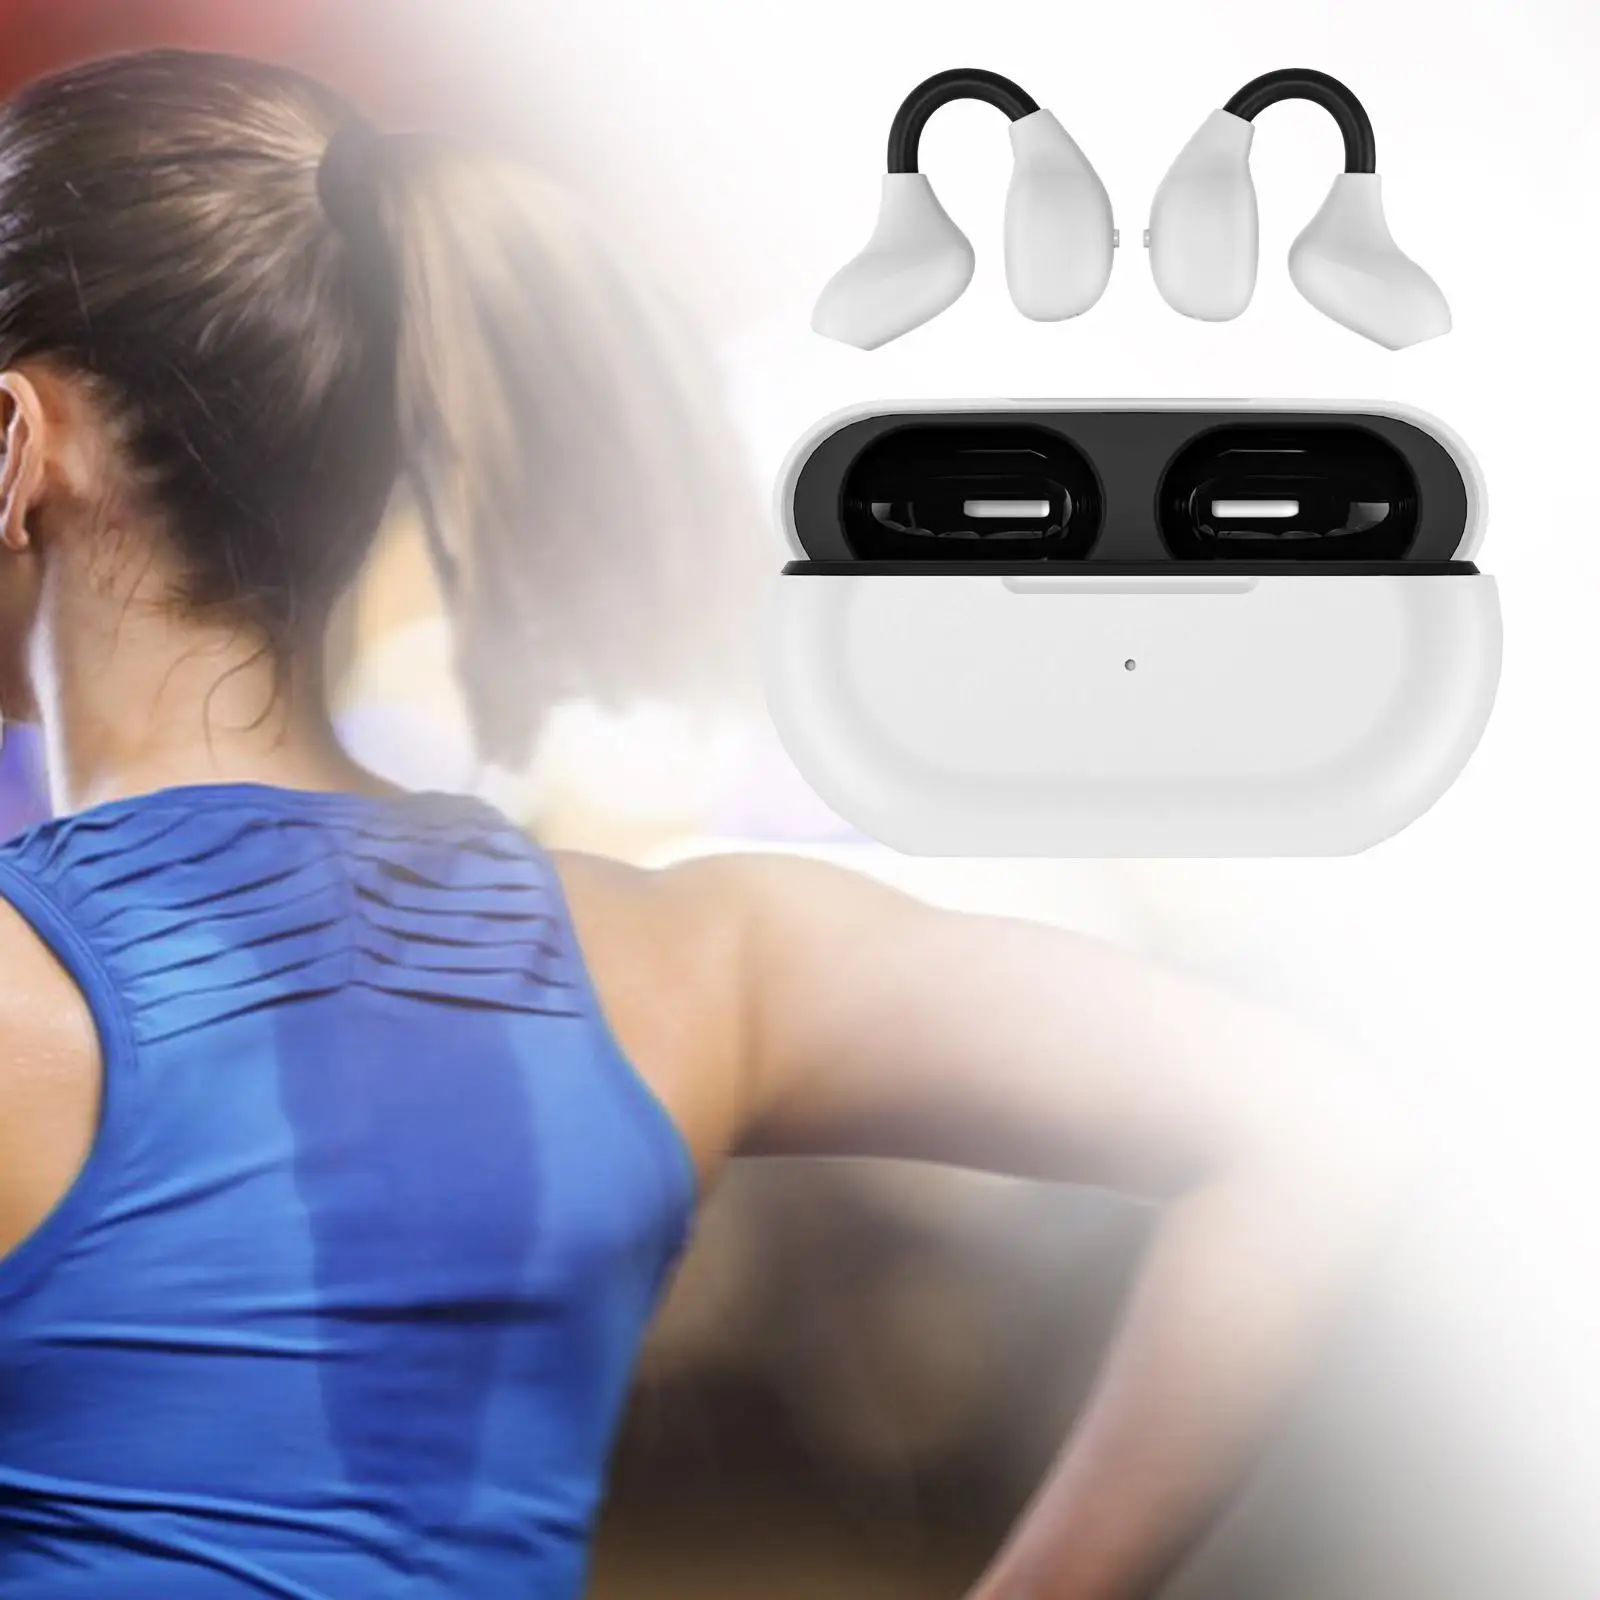 Ear Clip Wireless Headset Low Latency Noise Reduction Calling HiFi Sound Earphones Sport Earbuds for Running Fitness Workout